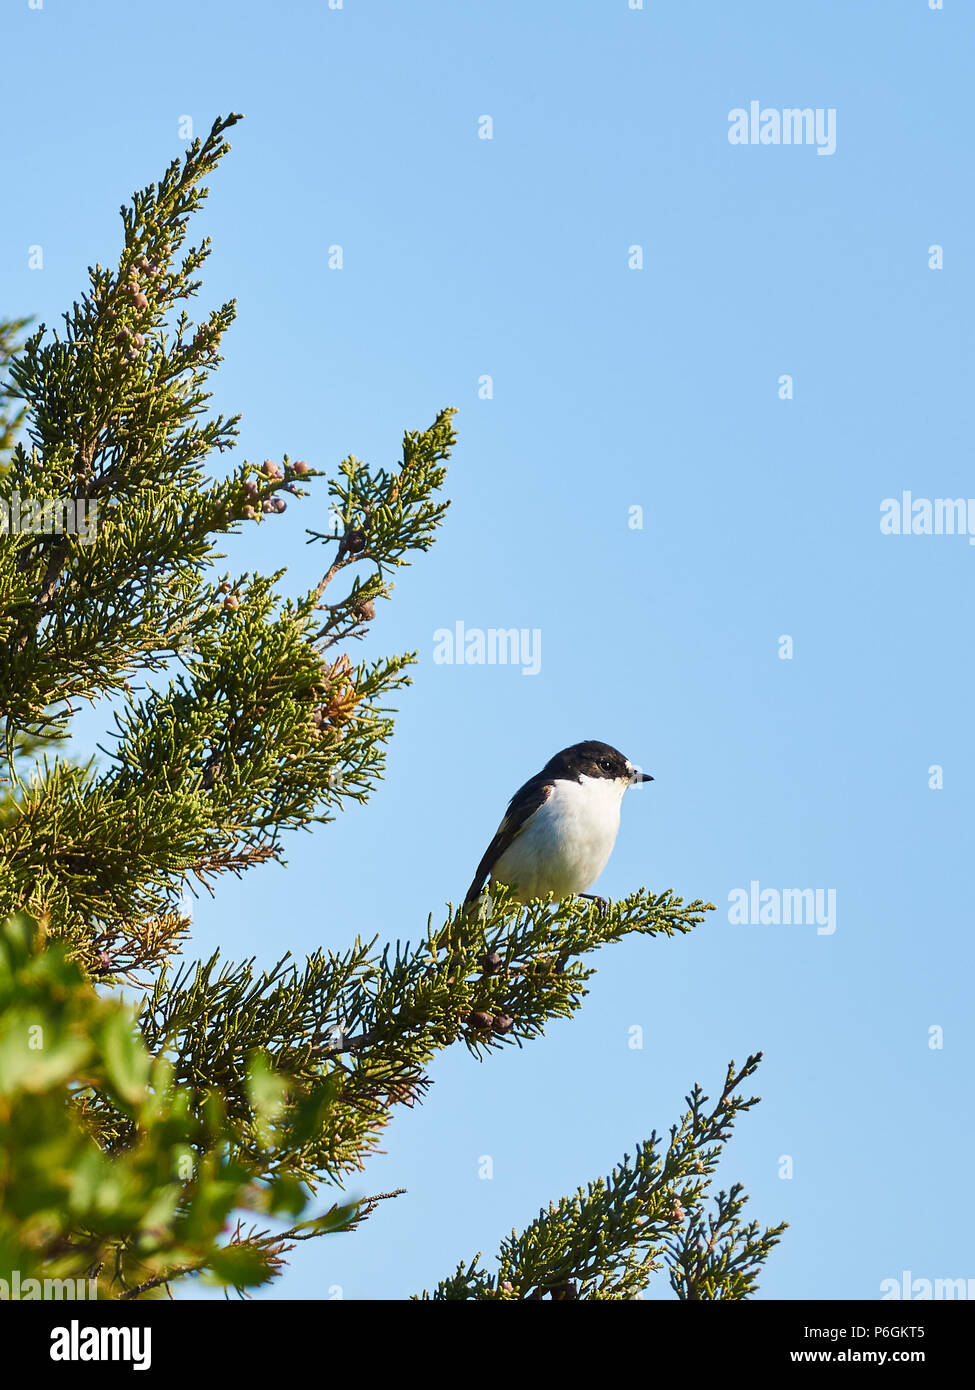 European pied flycatcher (Ficedula hypoleuca) over a Juniperus branch in Can Marroig in Ses Salines Natural Park (Formentera, Balearic islands, Spain) Stock Photo